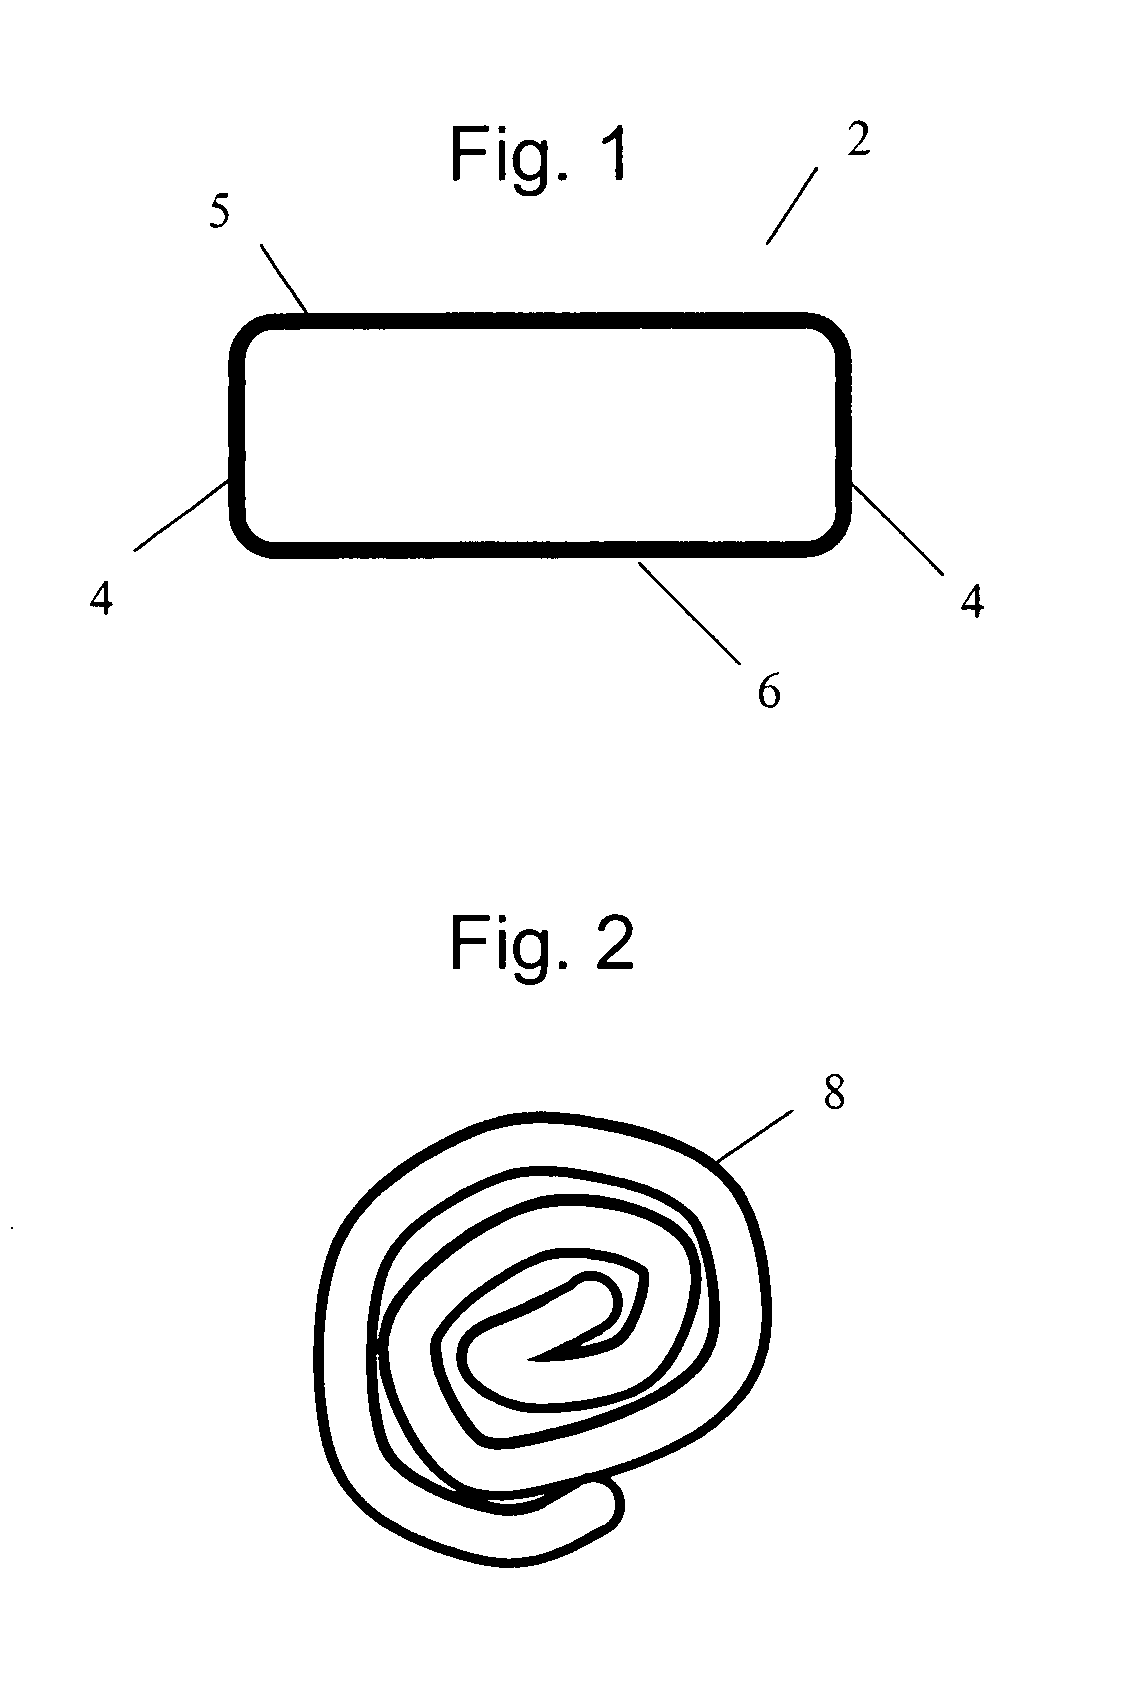 Hydrogel-based joint repair system and method